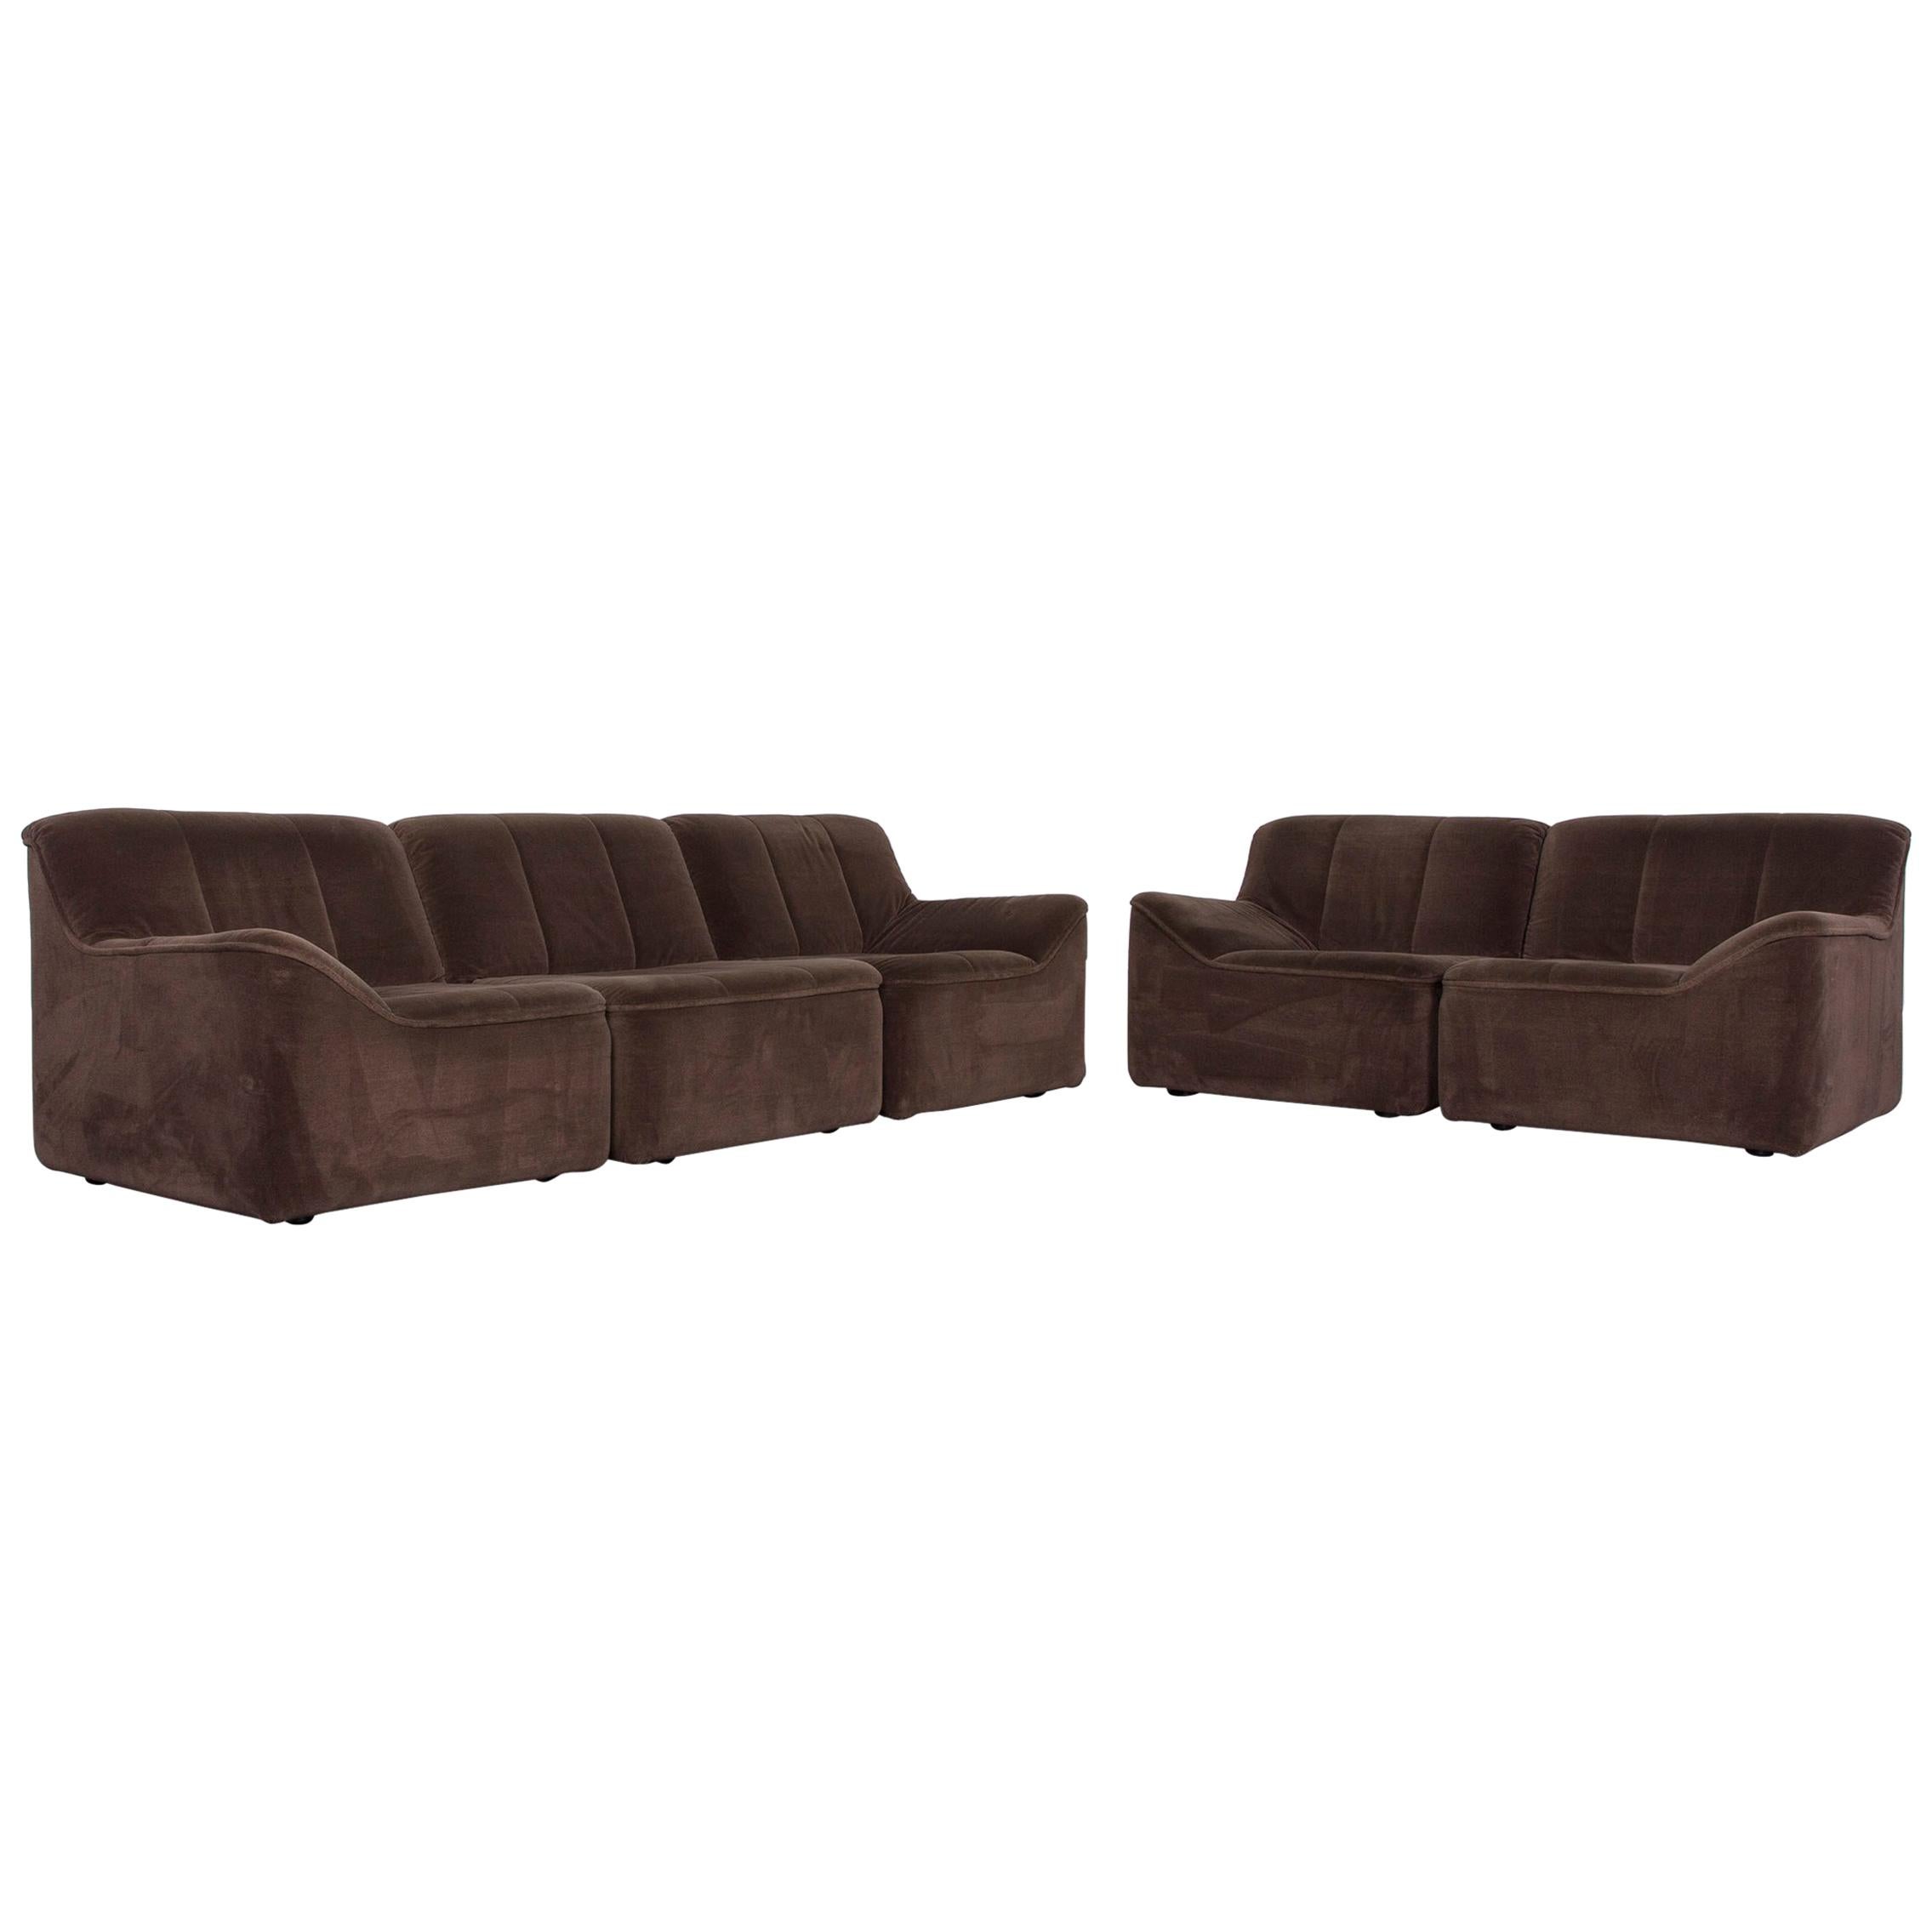 COR Designer Fabric Sofa Brown Three-Seat Couch For Sale